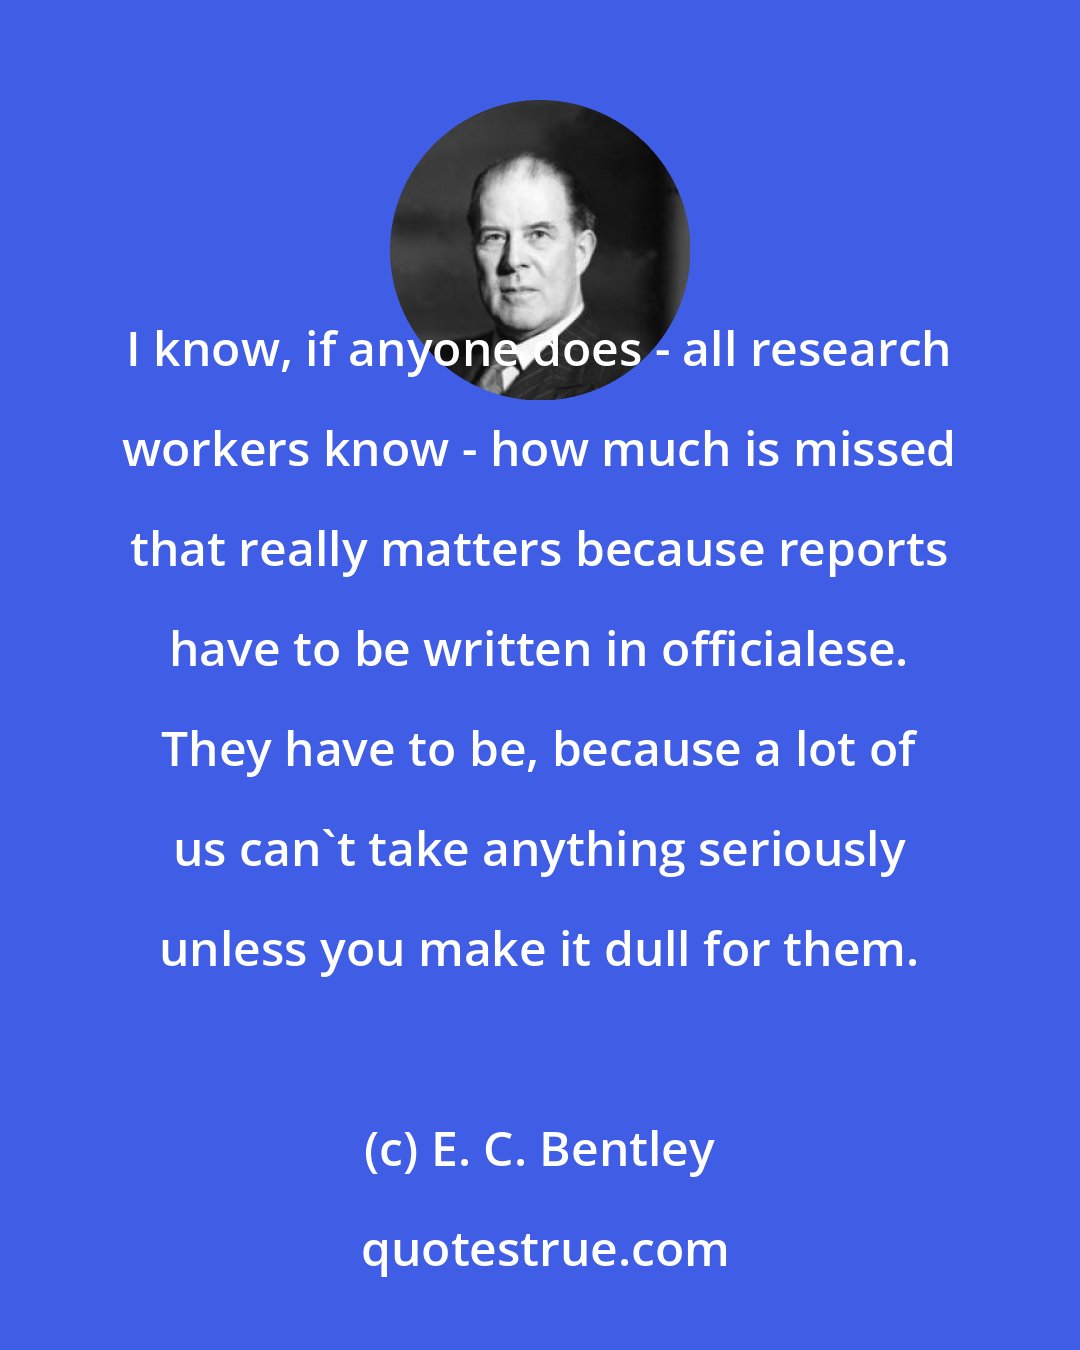 E. C. Bentley: I know, if anyone does - all research workers know - how much is missed that really matters because reports have to be written in officialese. They have to be, because a lot of us can't take anything seriously unless you make it dull for them.